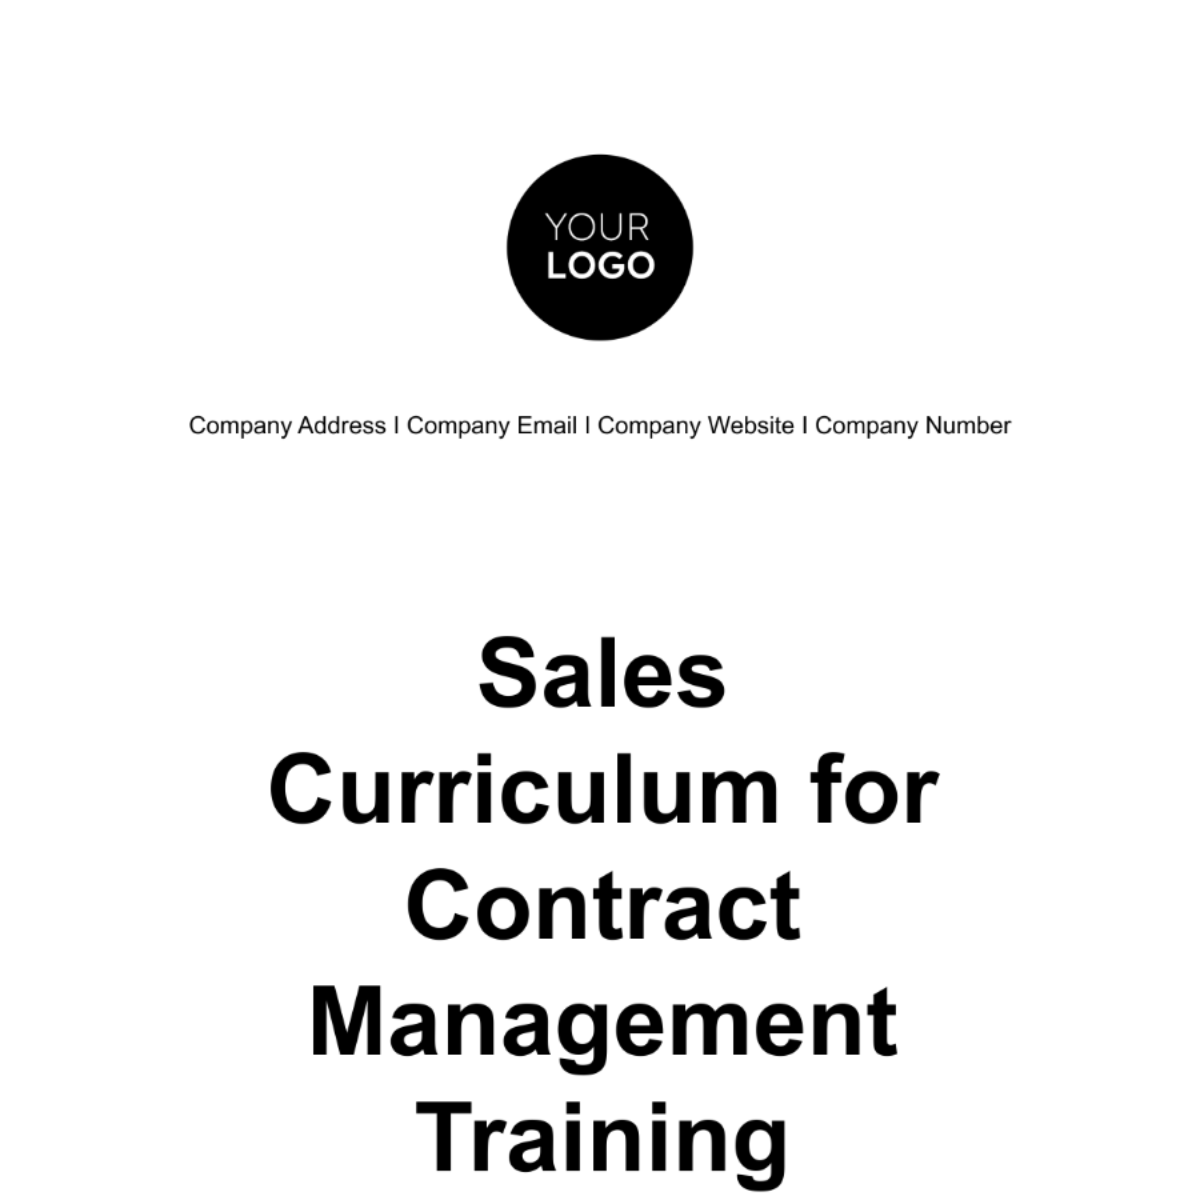 Sales Curriculum for Contract Management Training Template